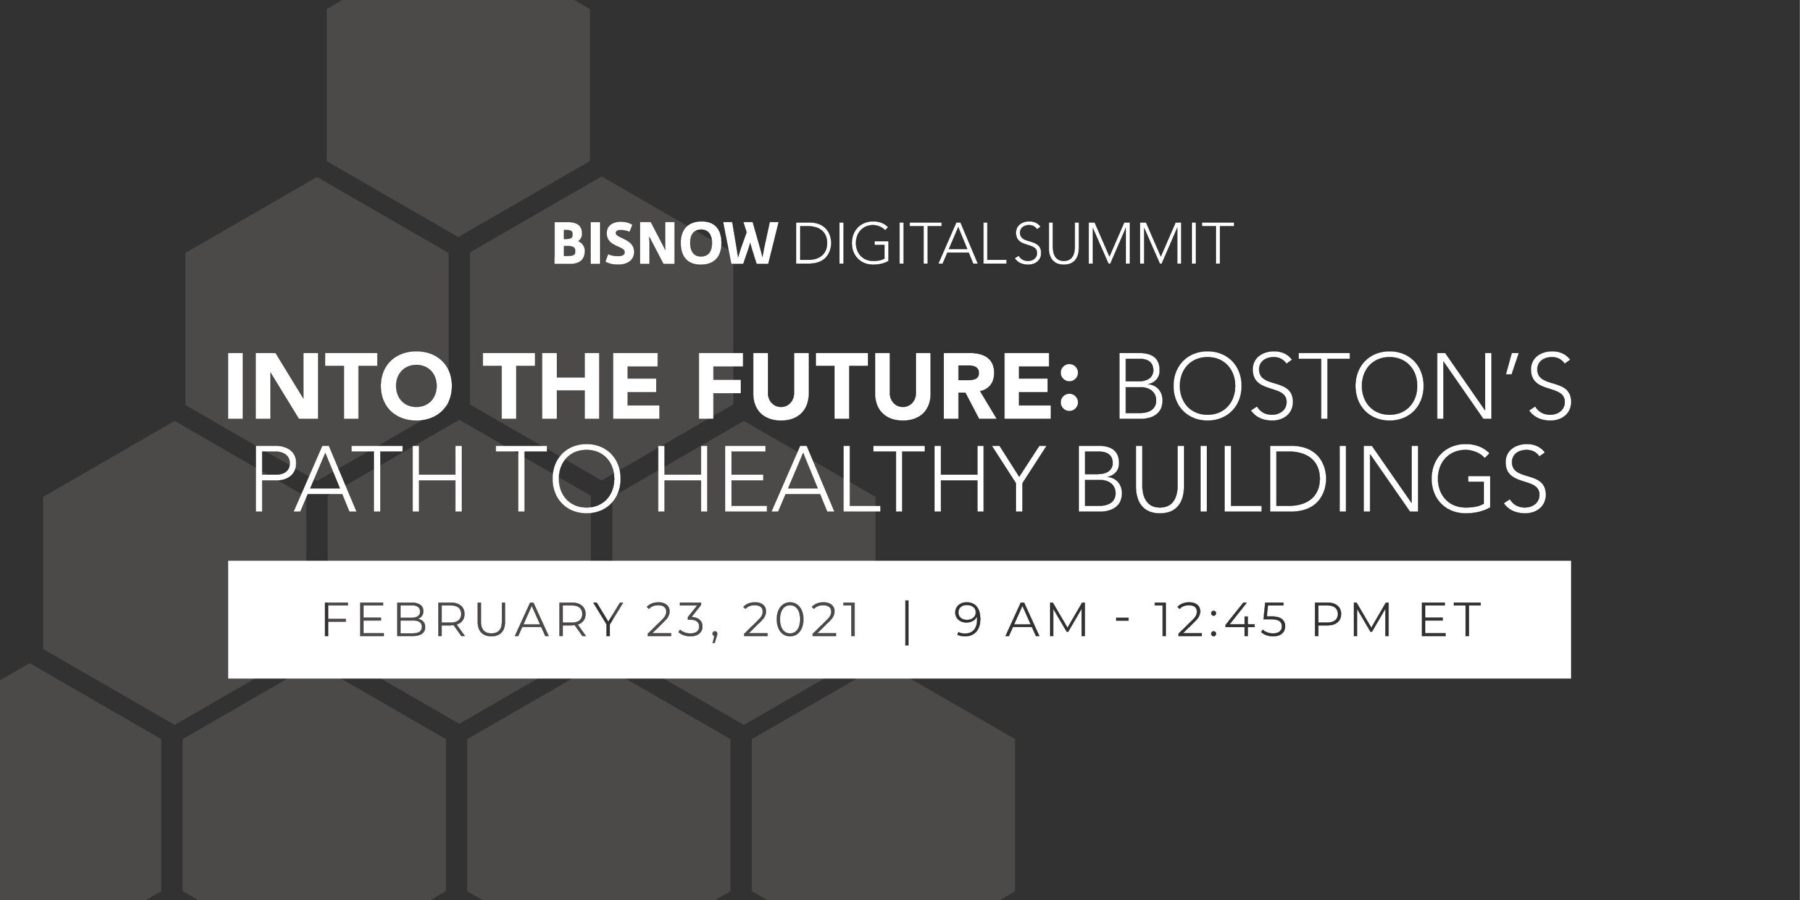 Bisnow Digital Summit: Into the Future: Boston's Path to Healthy Buildings